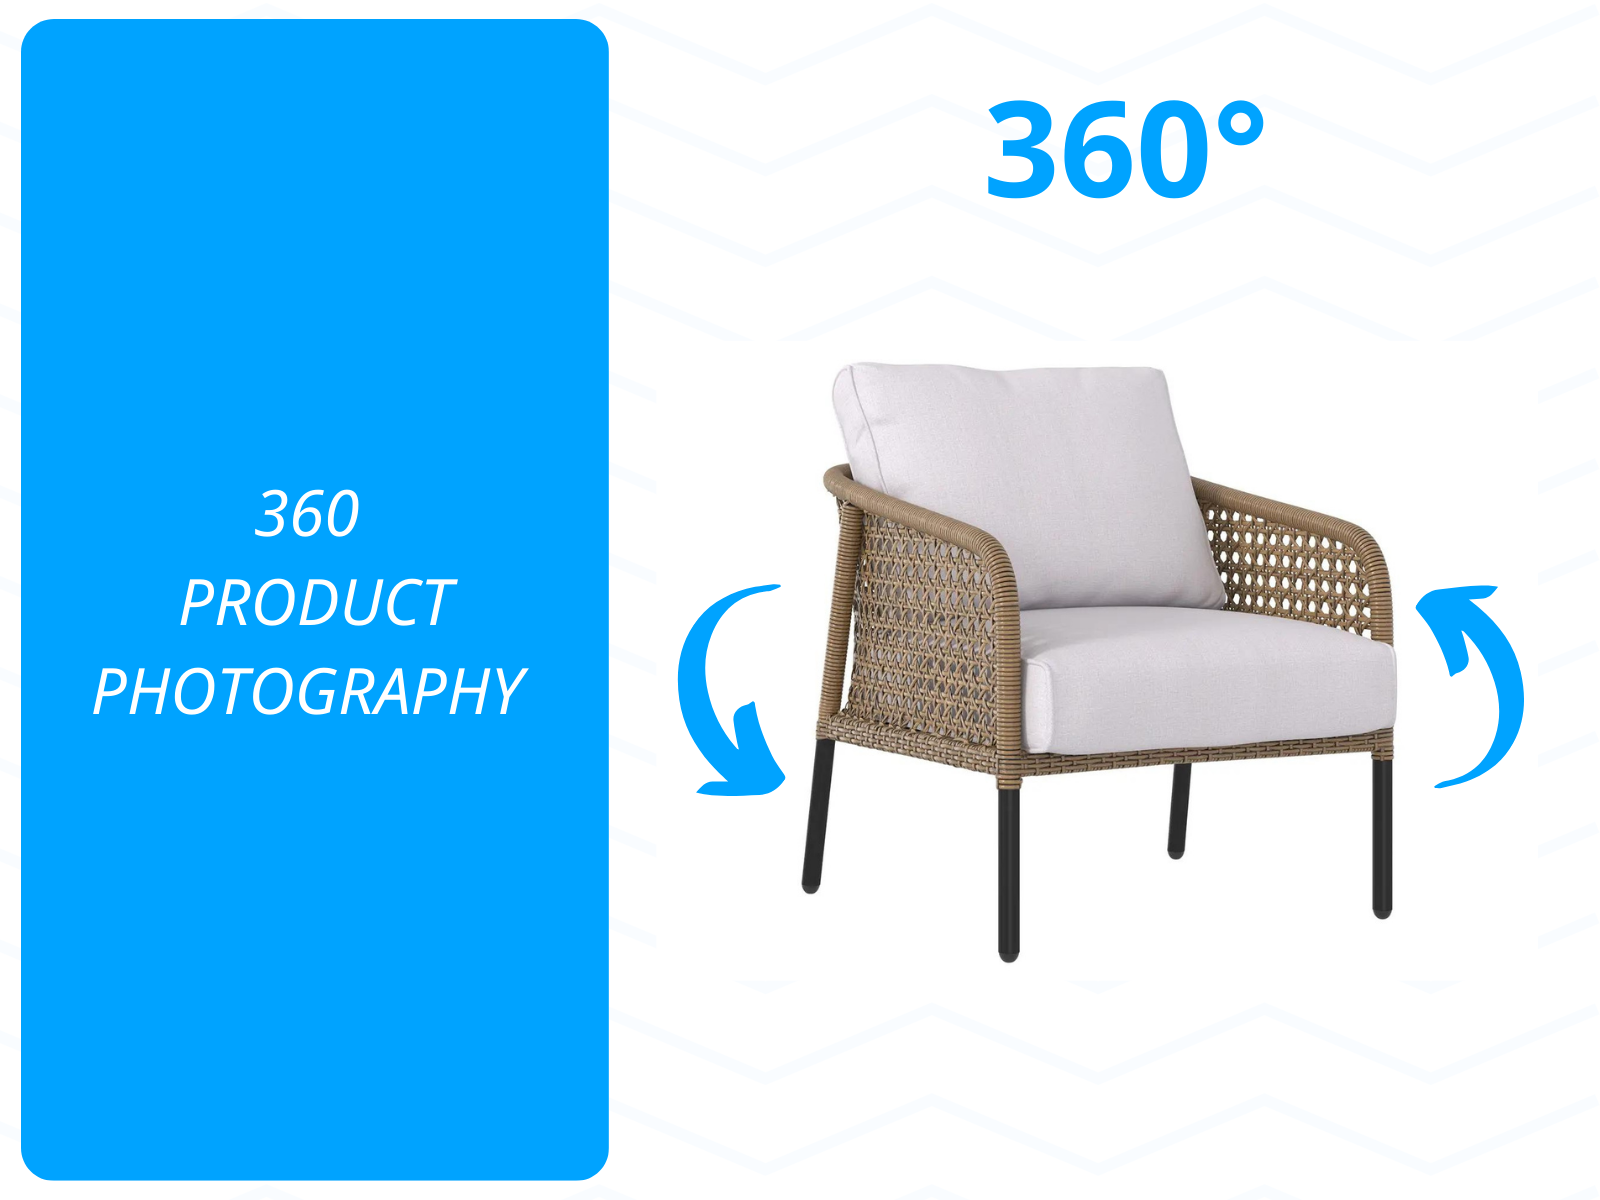 360 Product Photography